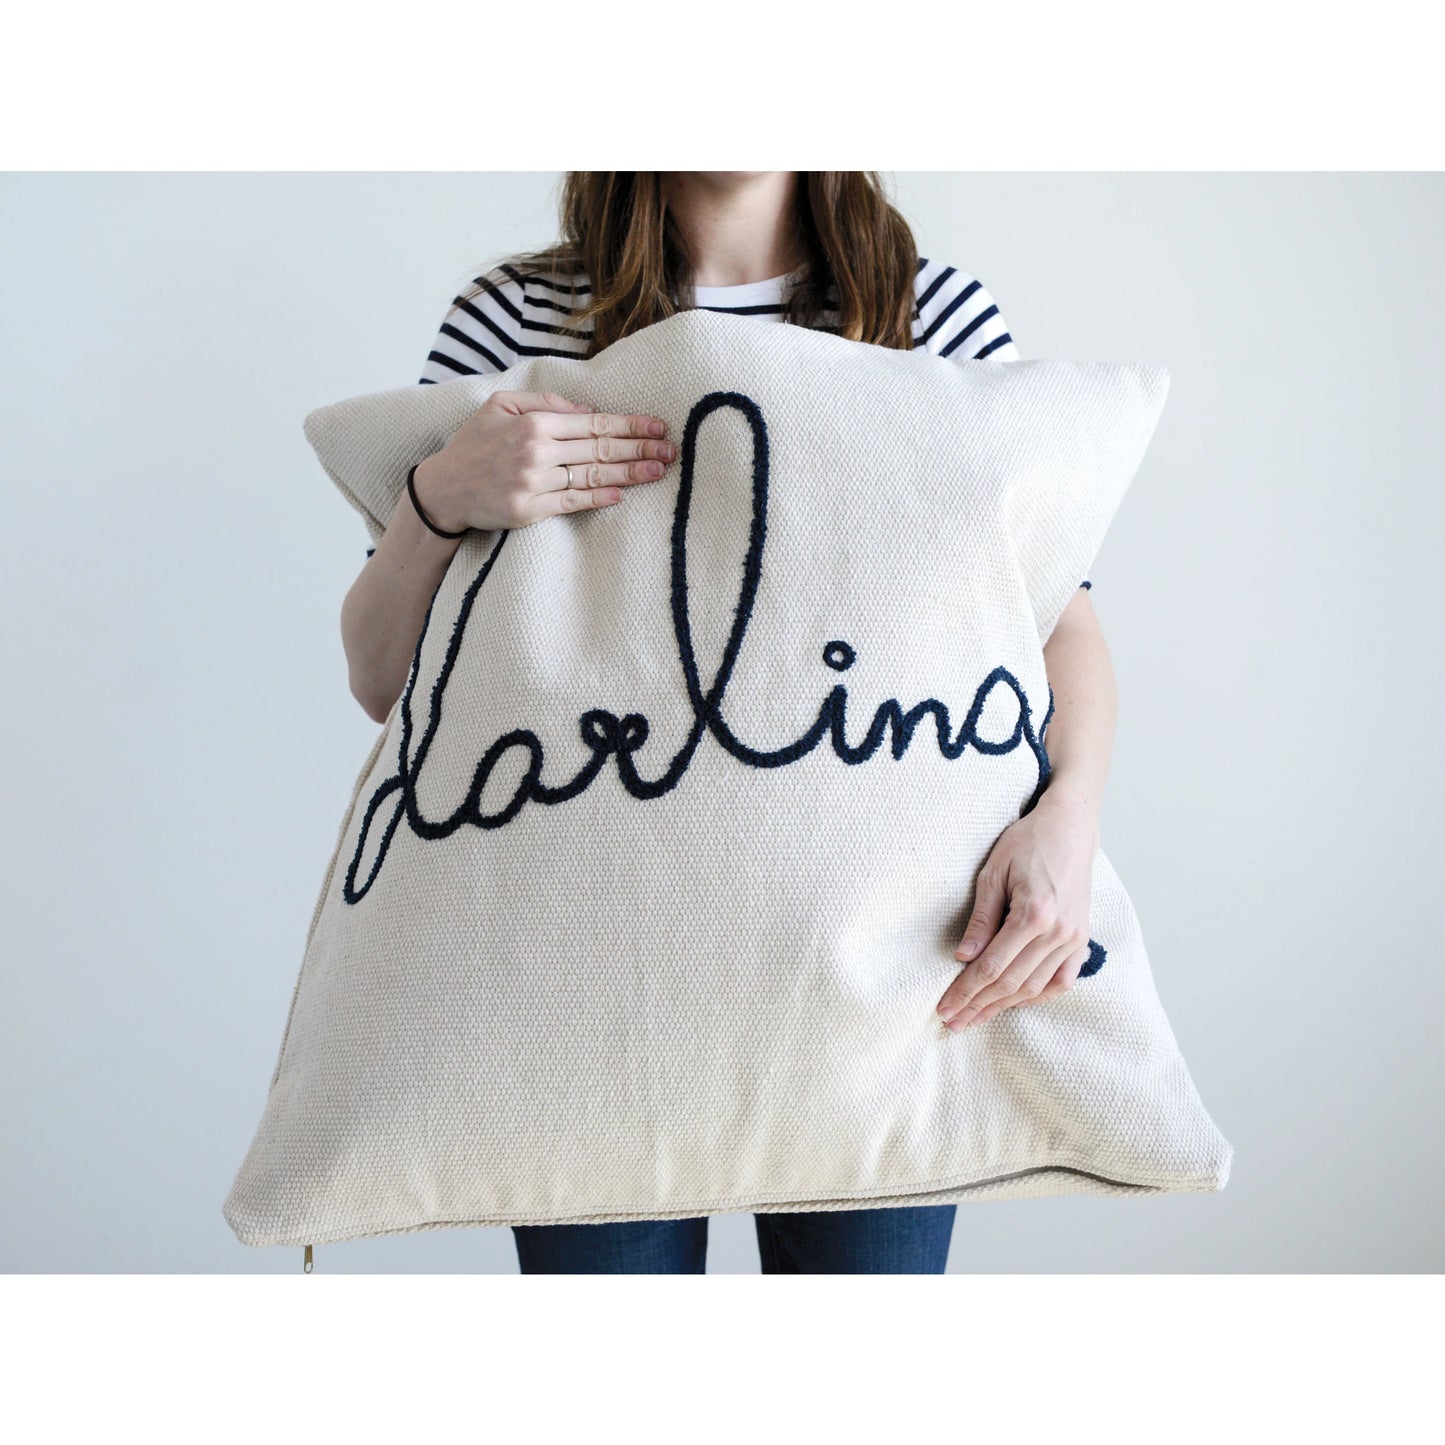 Darling Square Pillow